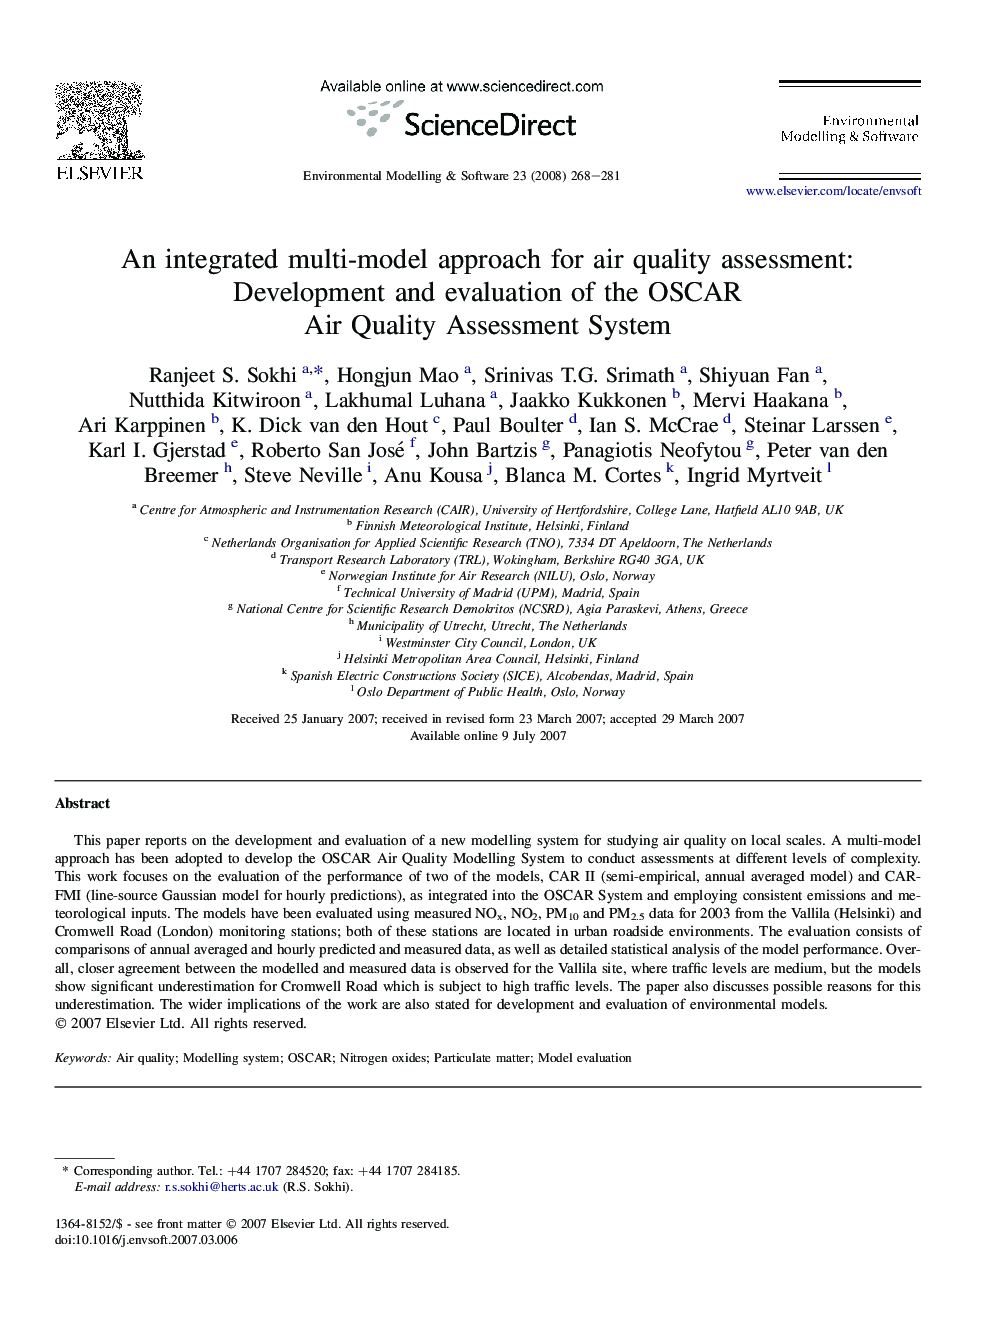 An integrated multi-model approach for air quality assessment: Development and evaluation of the OSCAR Air Quality Assessment System